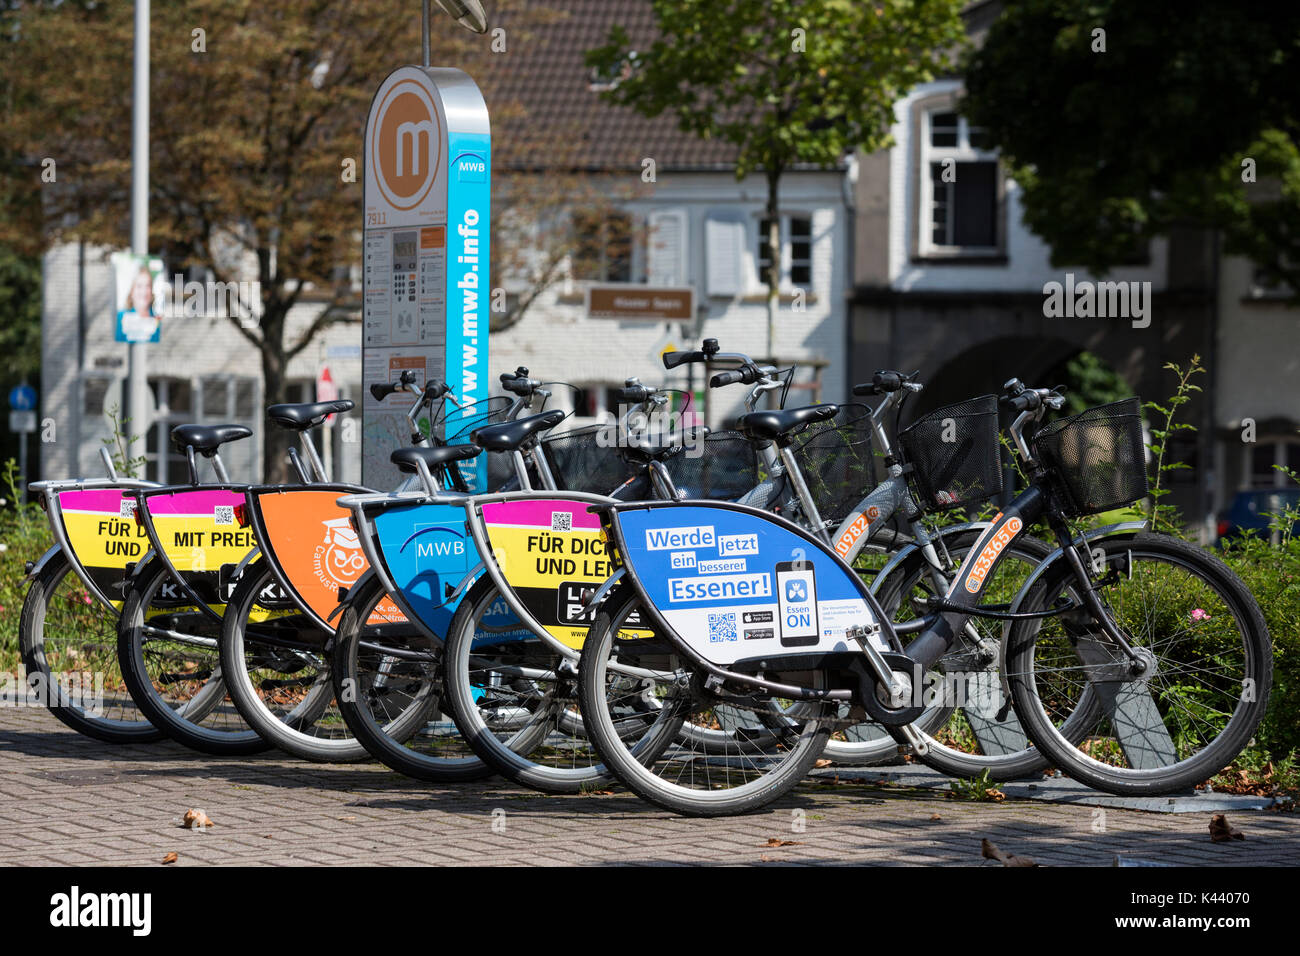 Bicycles in a docking station in Mülheim an der Ruhr, Germany Stock Photo